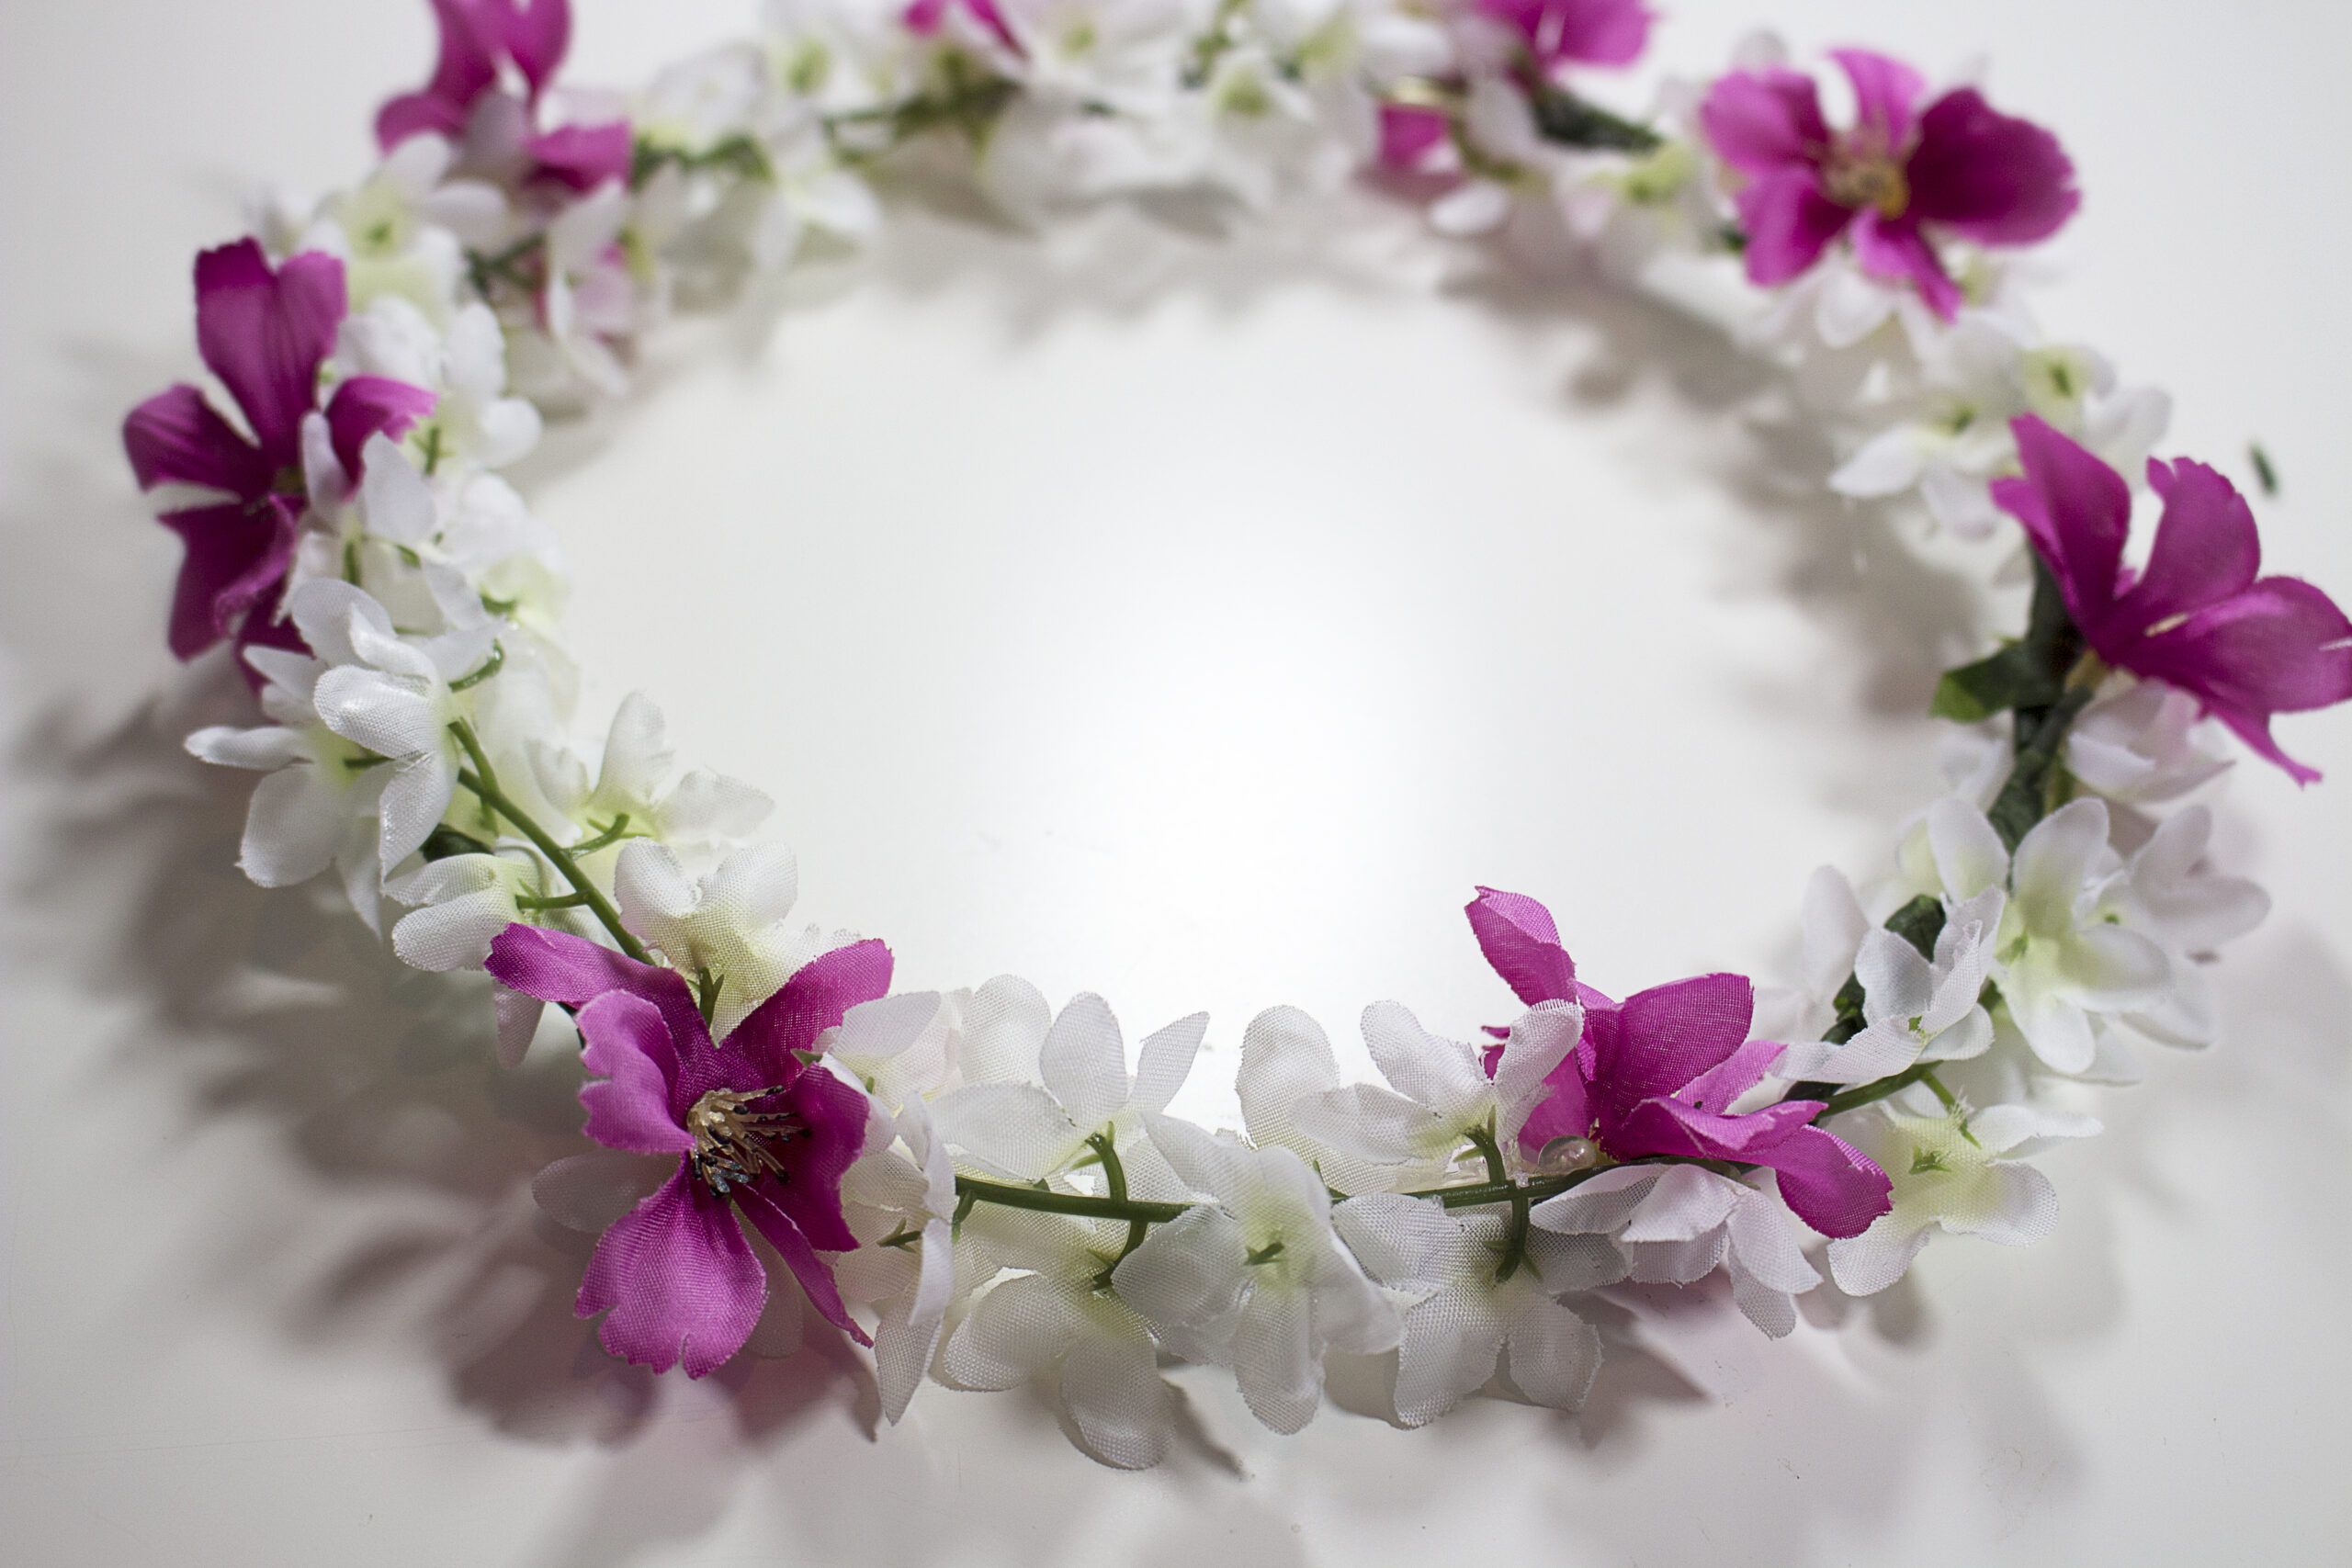 Make your own Floral Crown